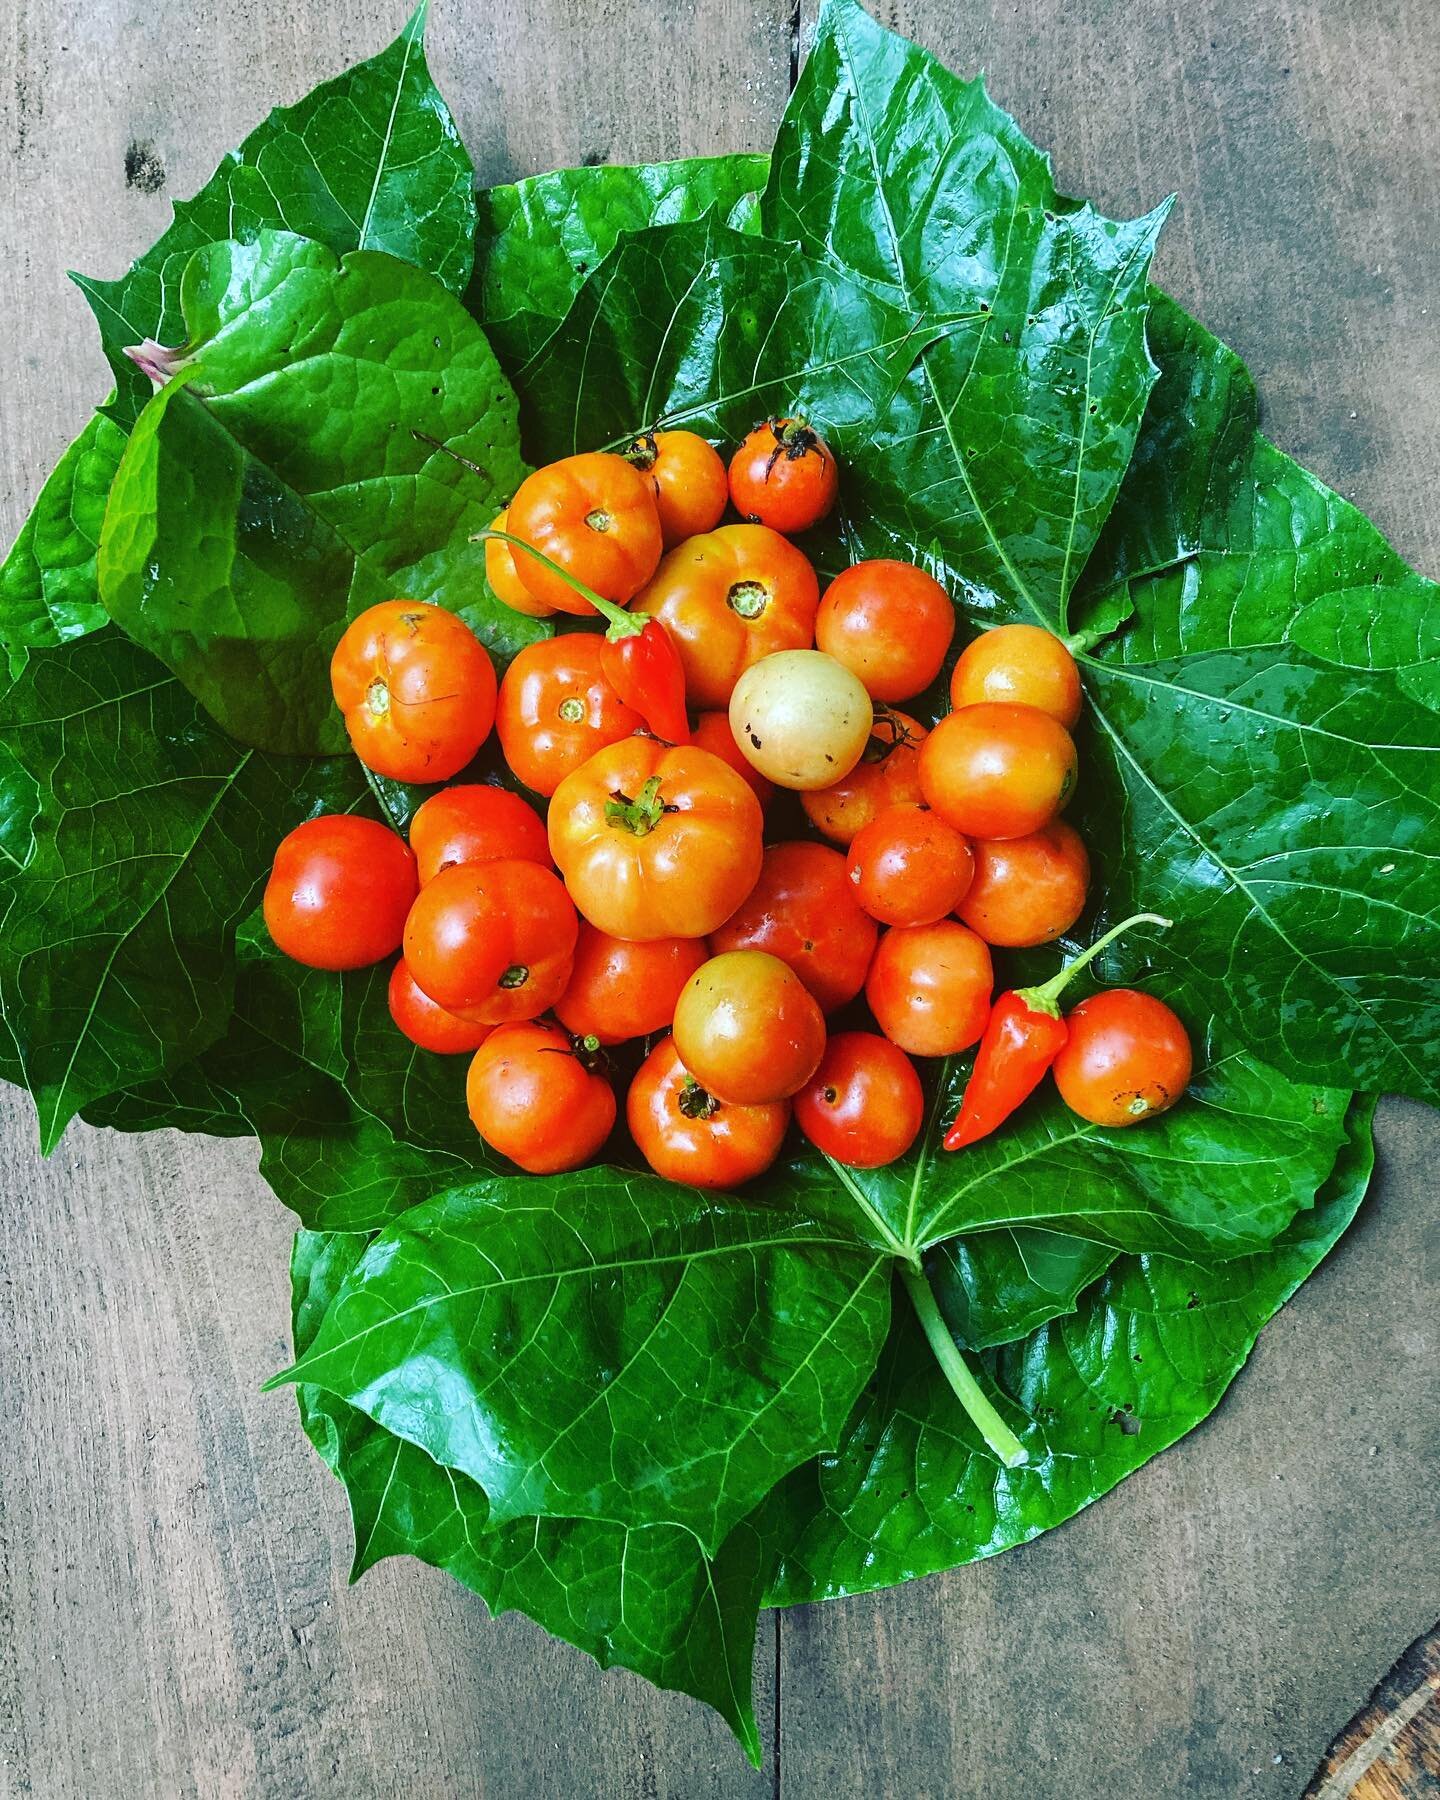 Fresh homegrown tomatoes and chillis hand delivered in a little leaf parcel - the best kind of delivery.